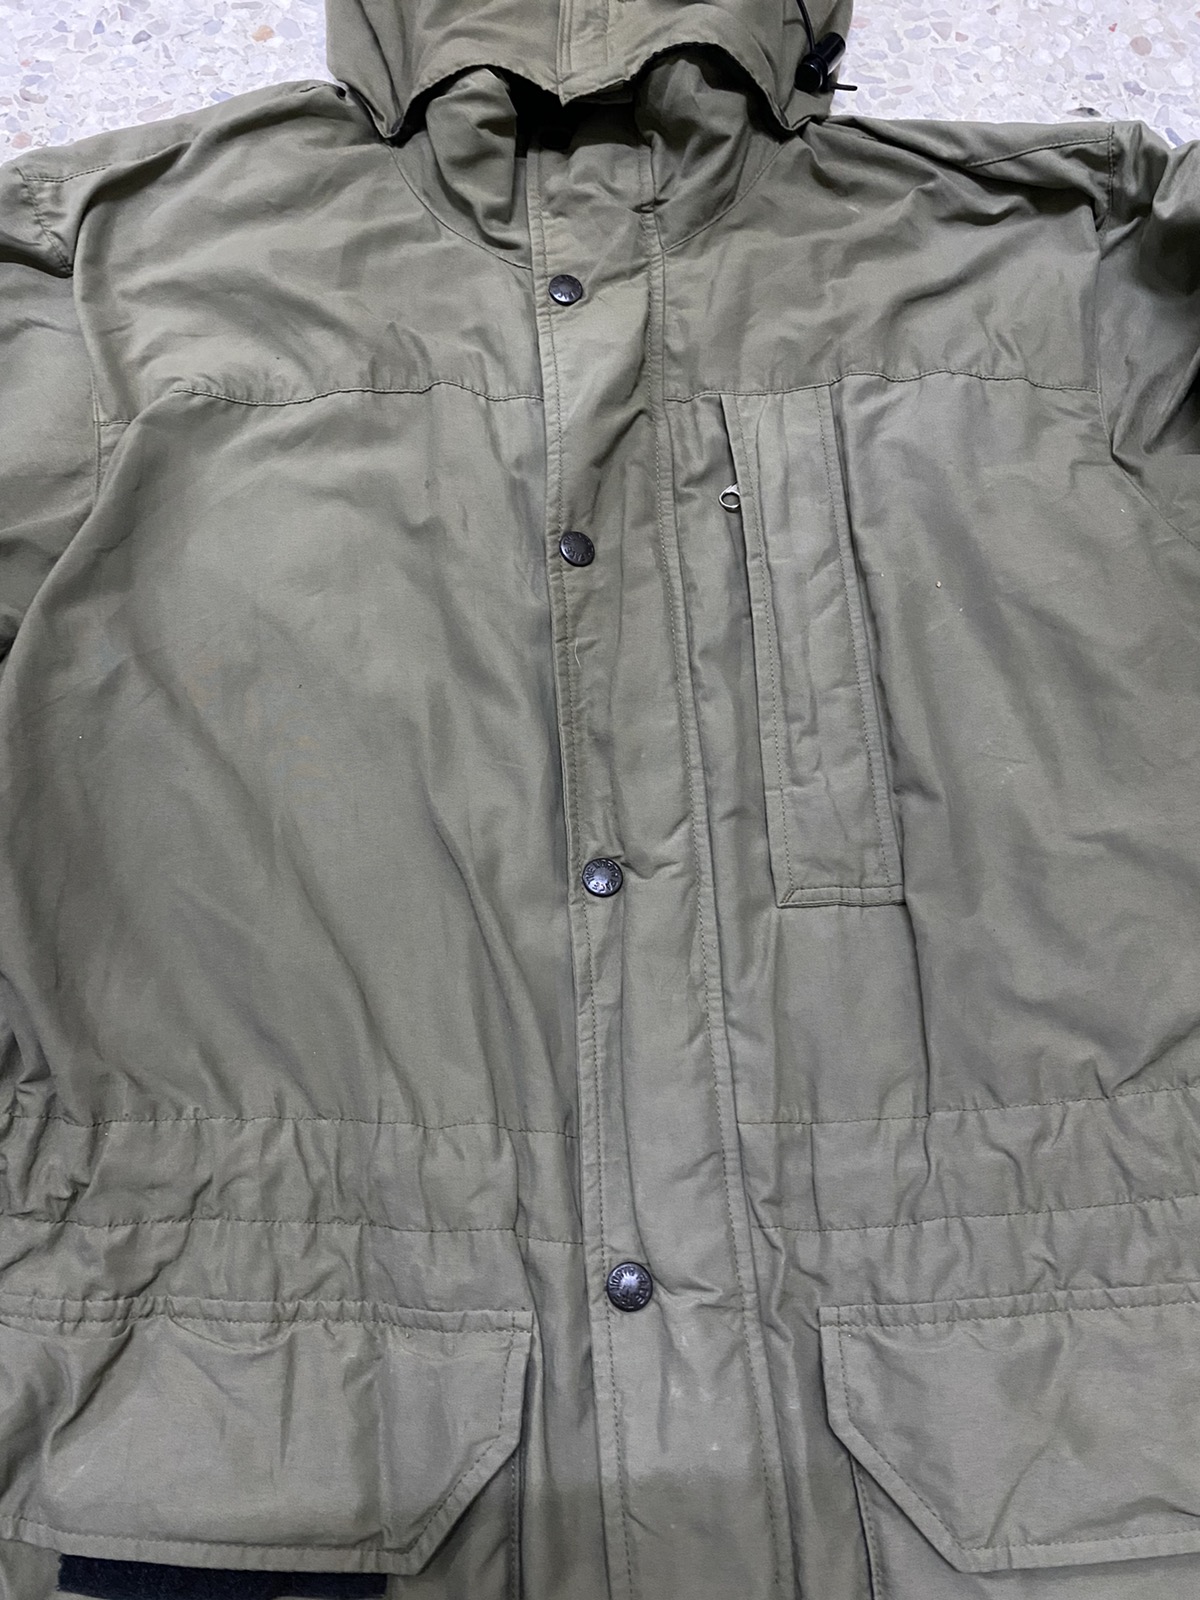 Vintage The North Face Parka Jacket Goretex With Hoodie - 6